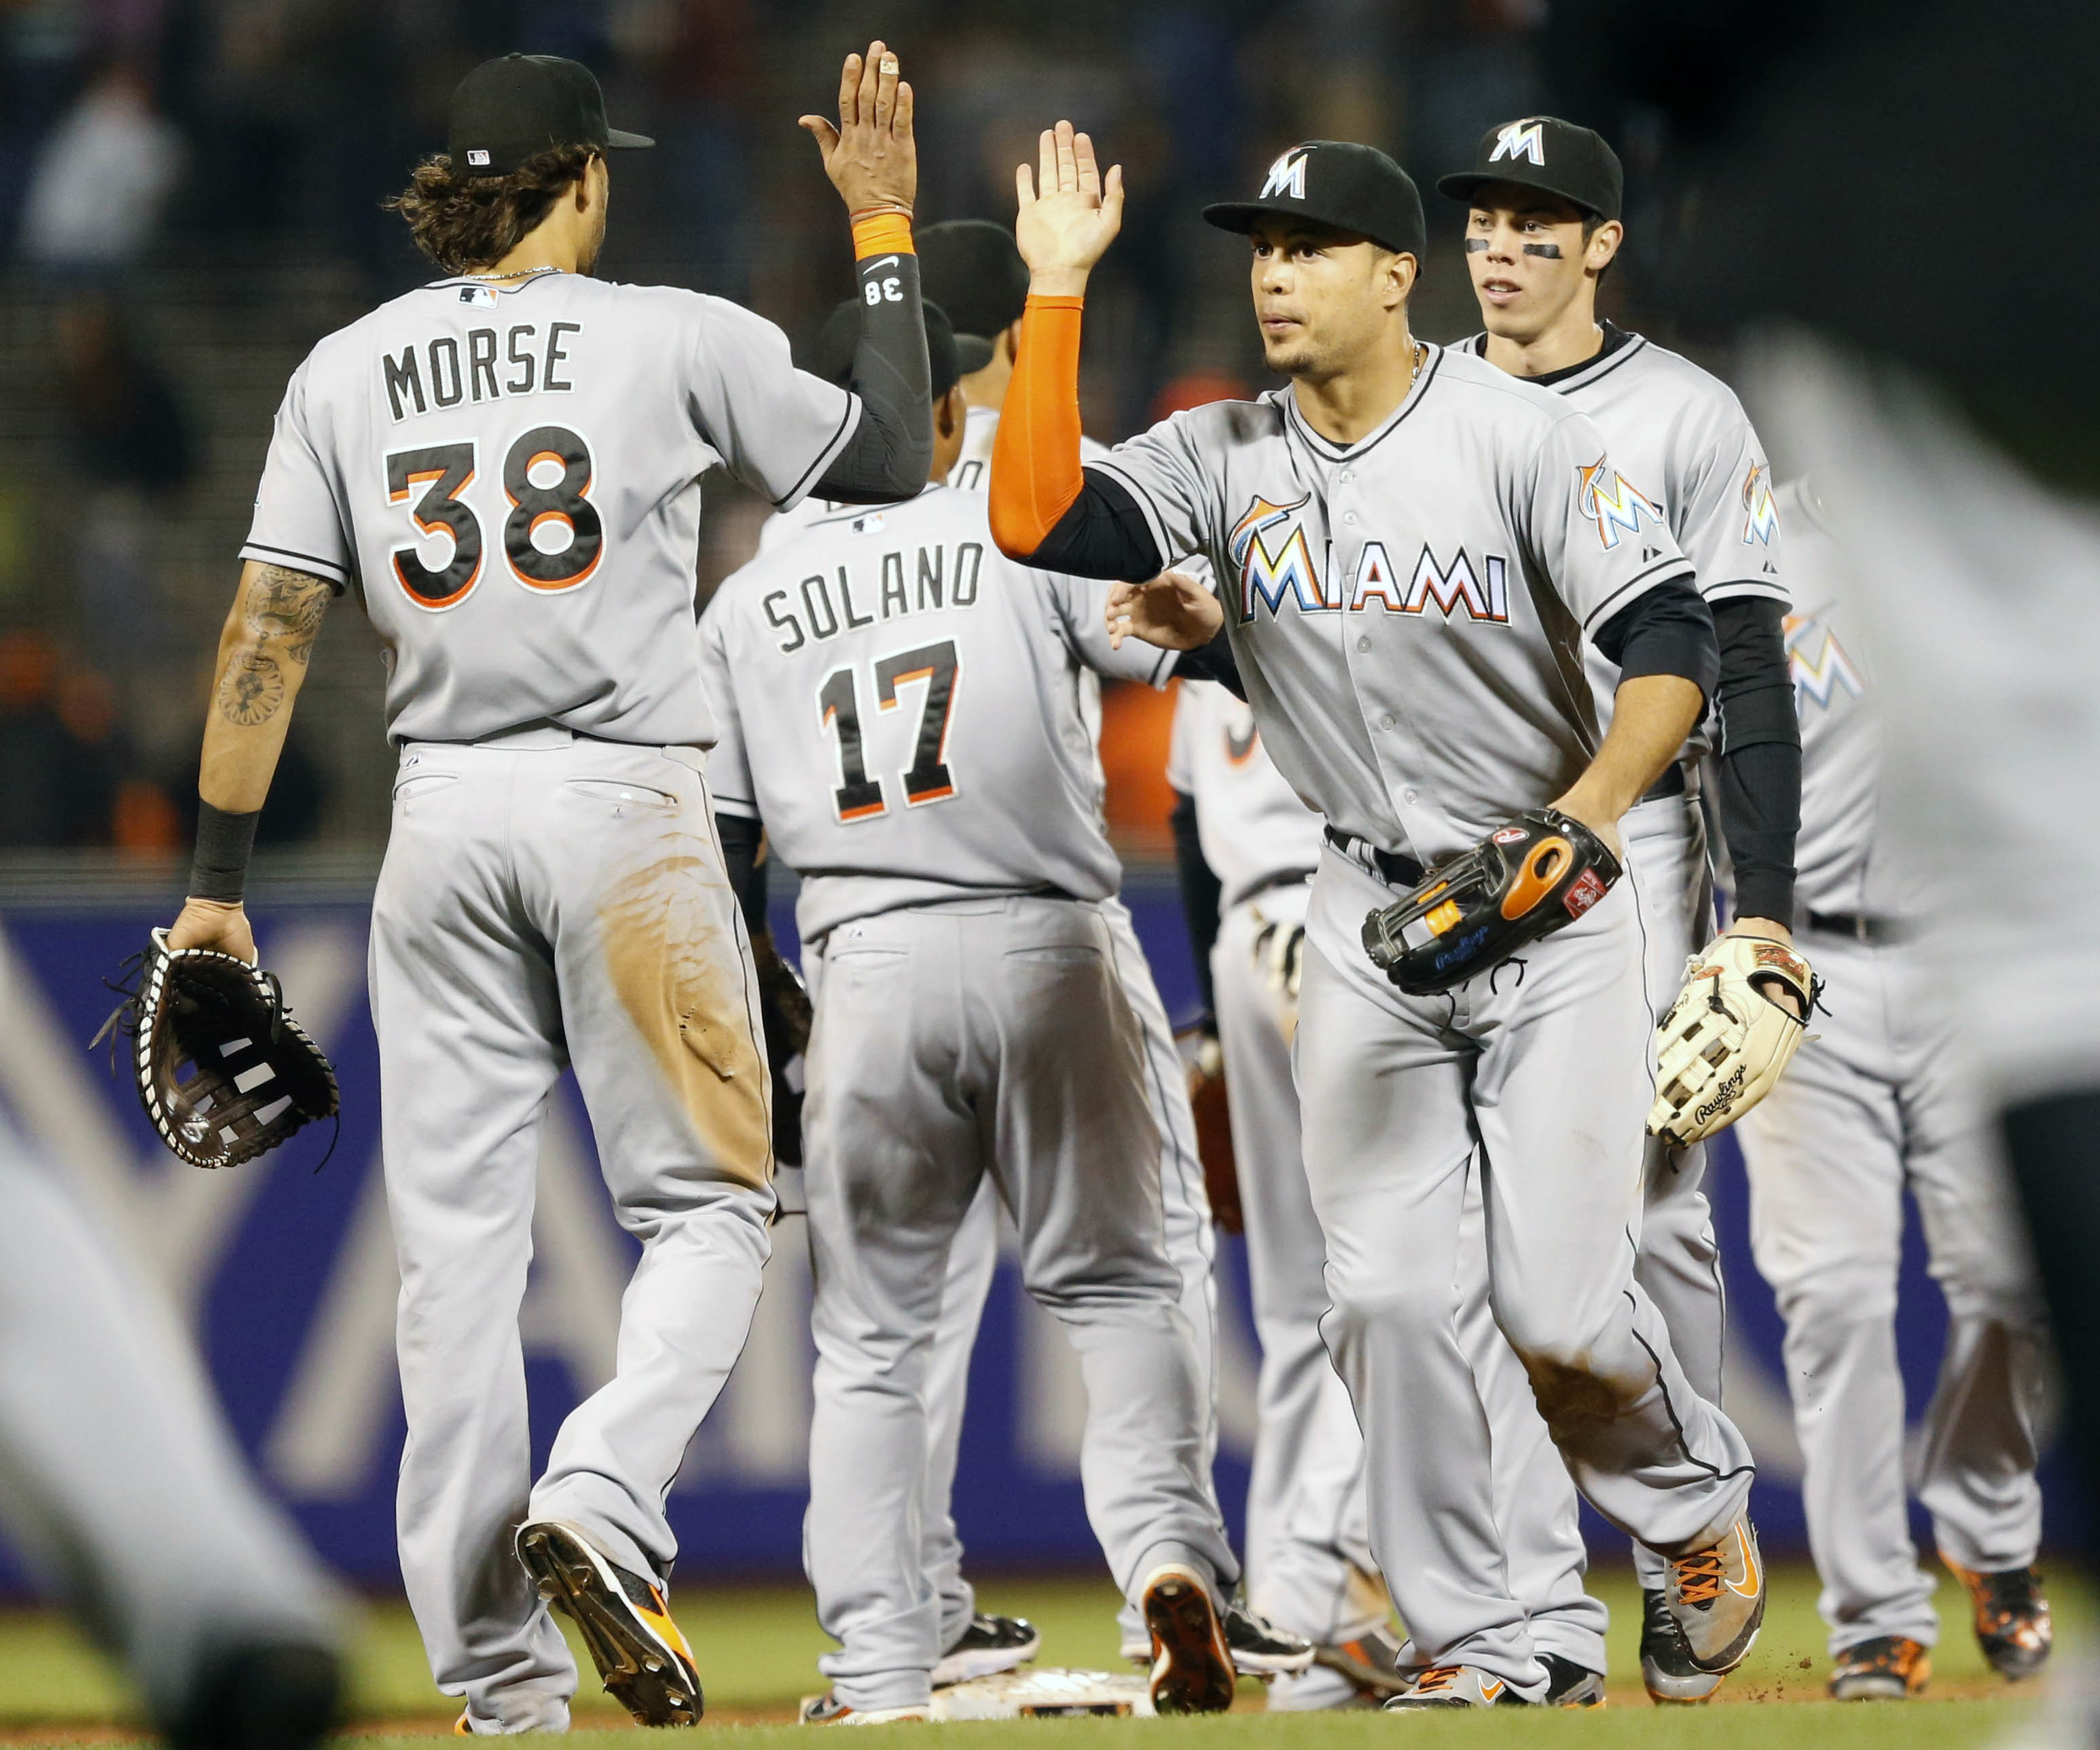 Giants get 2 in the 9th to edge Marlins 3-2